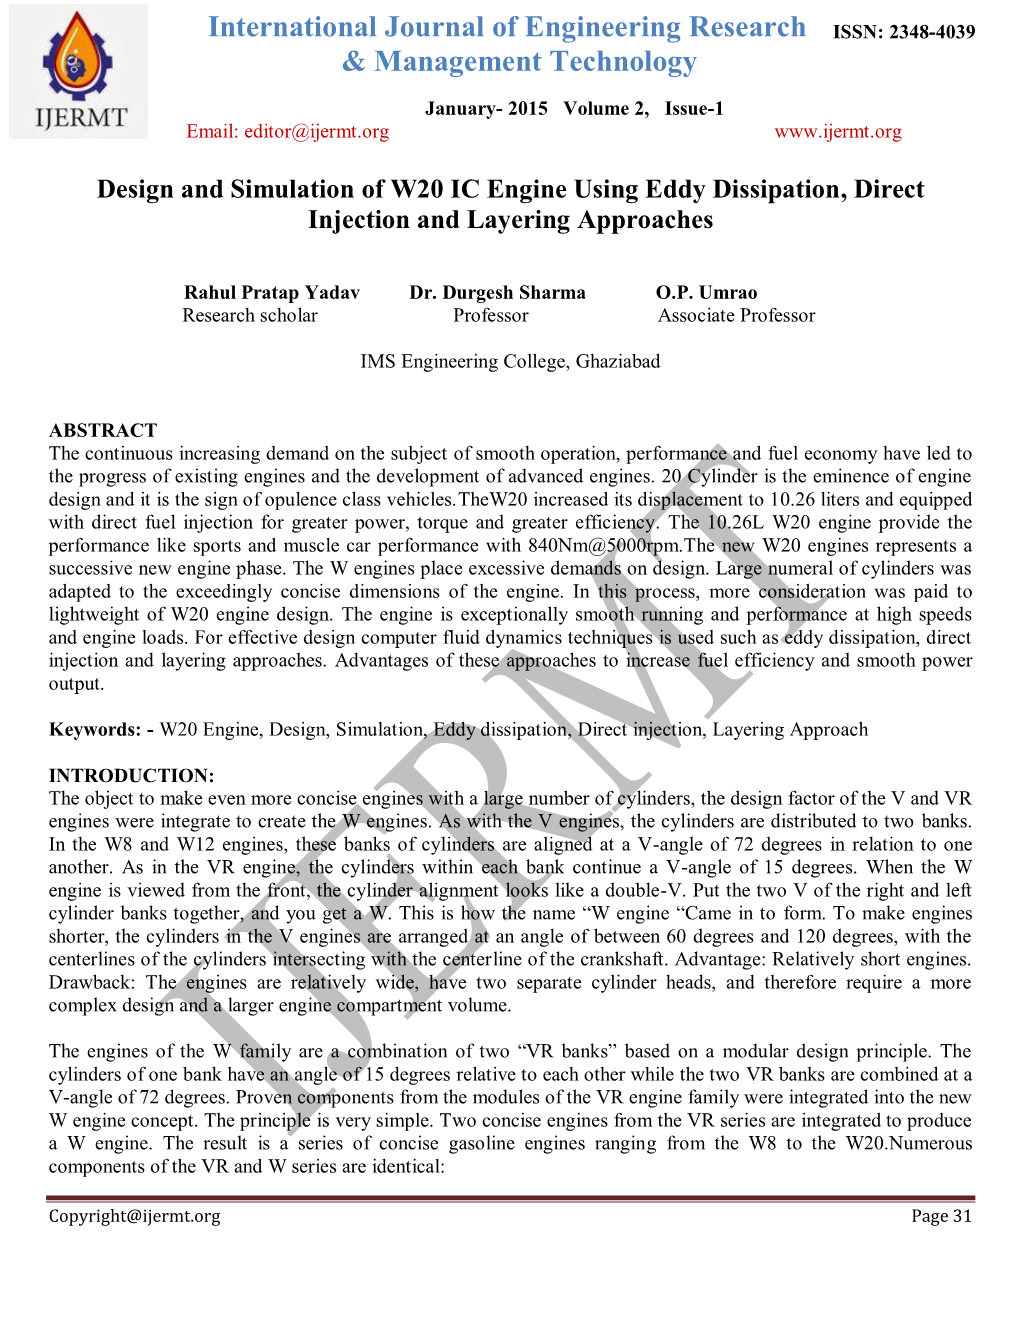 International Journal of Engineering Research & Management Technology